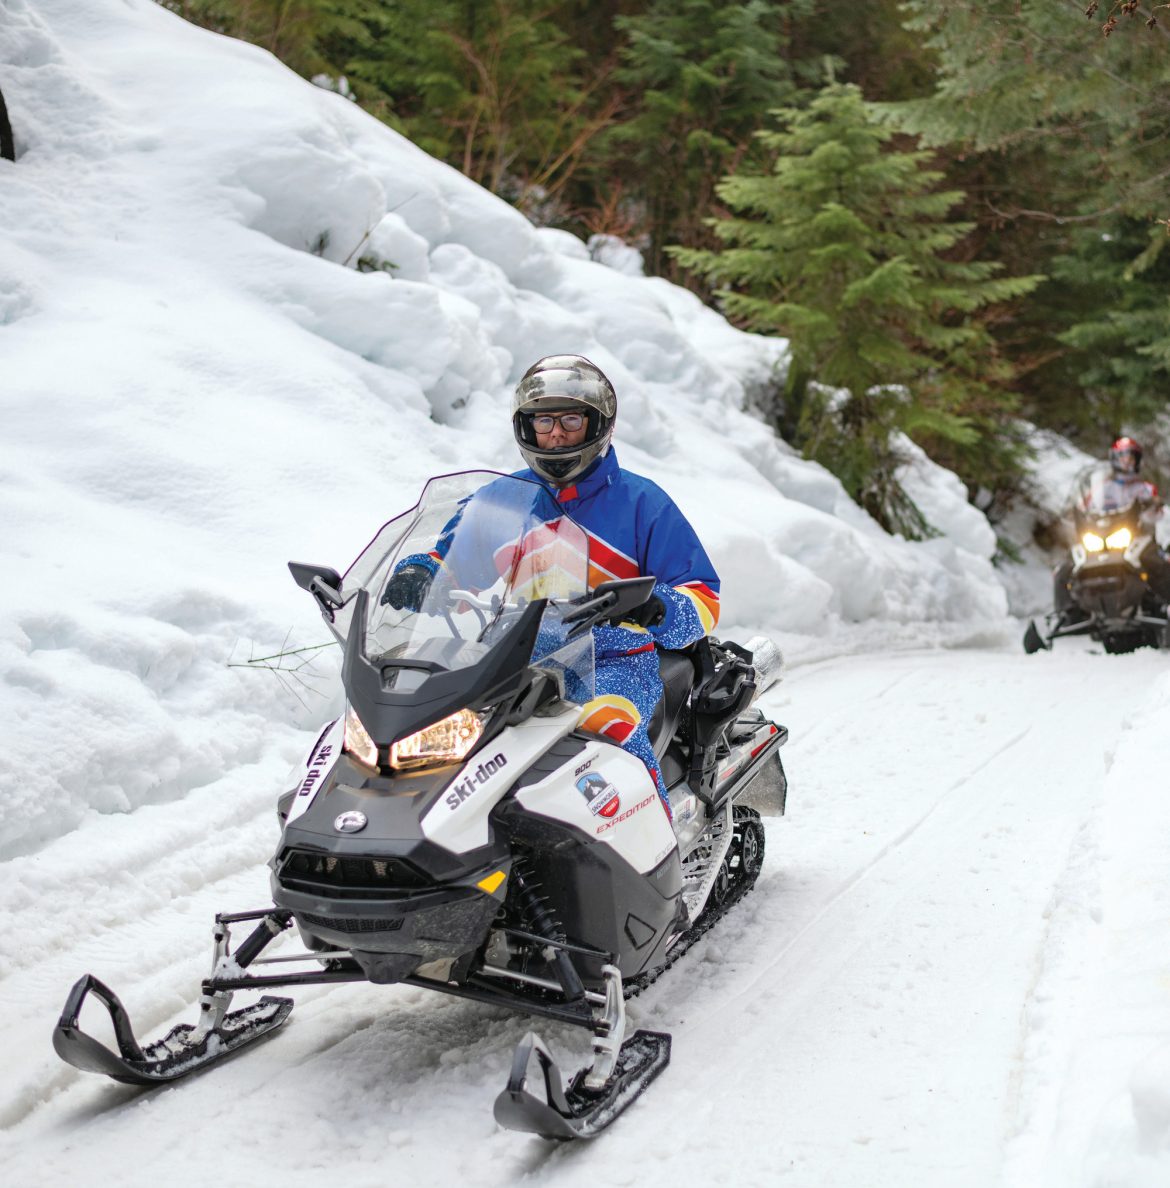 Exploring by snowmobile near Leavenworth rewards with dramatic scenery.